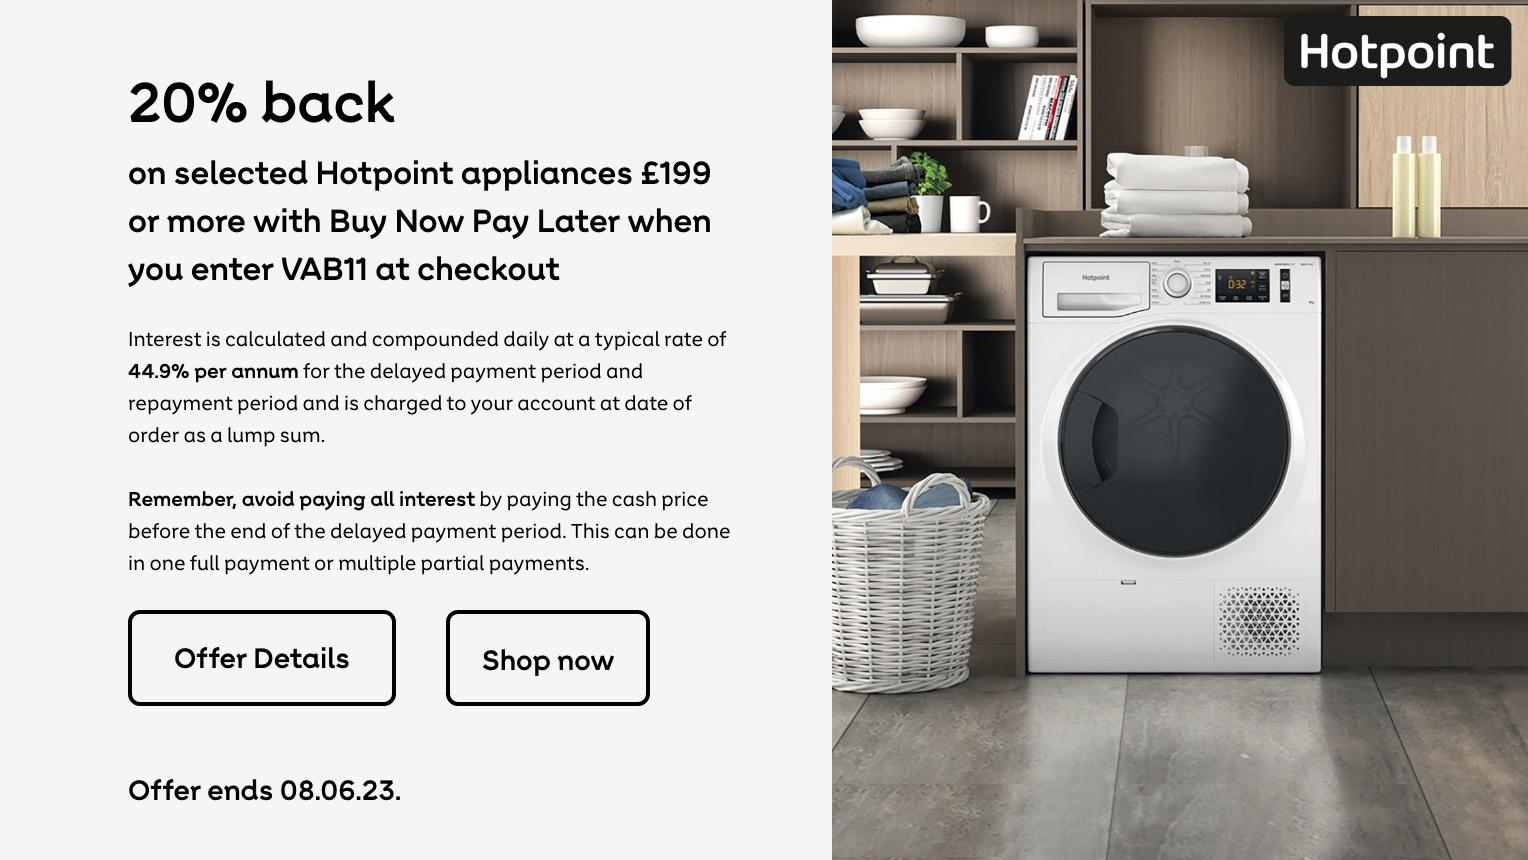 20% back on selected Hotpoint appliances £199 or more with Buy Now Pay Later when you enter VAB11 at checkout. Offer Ends 08.06.23.